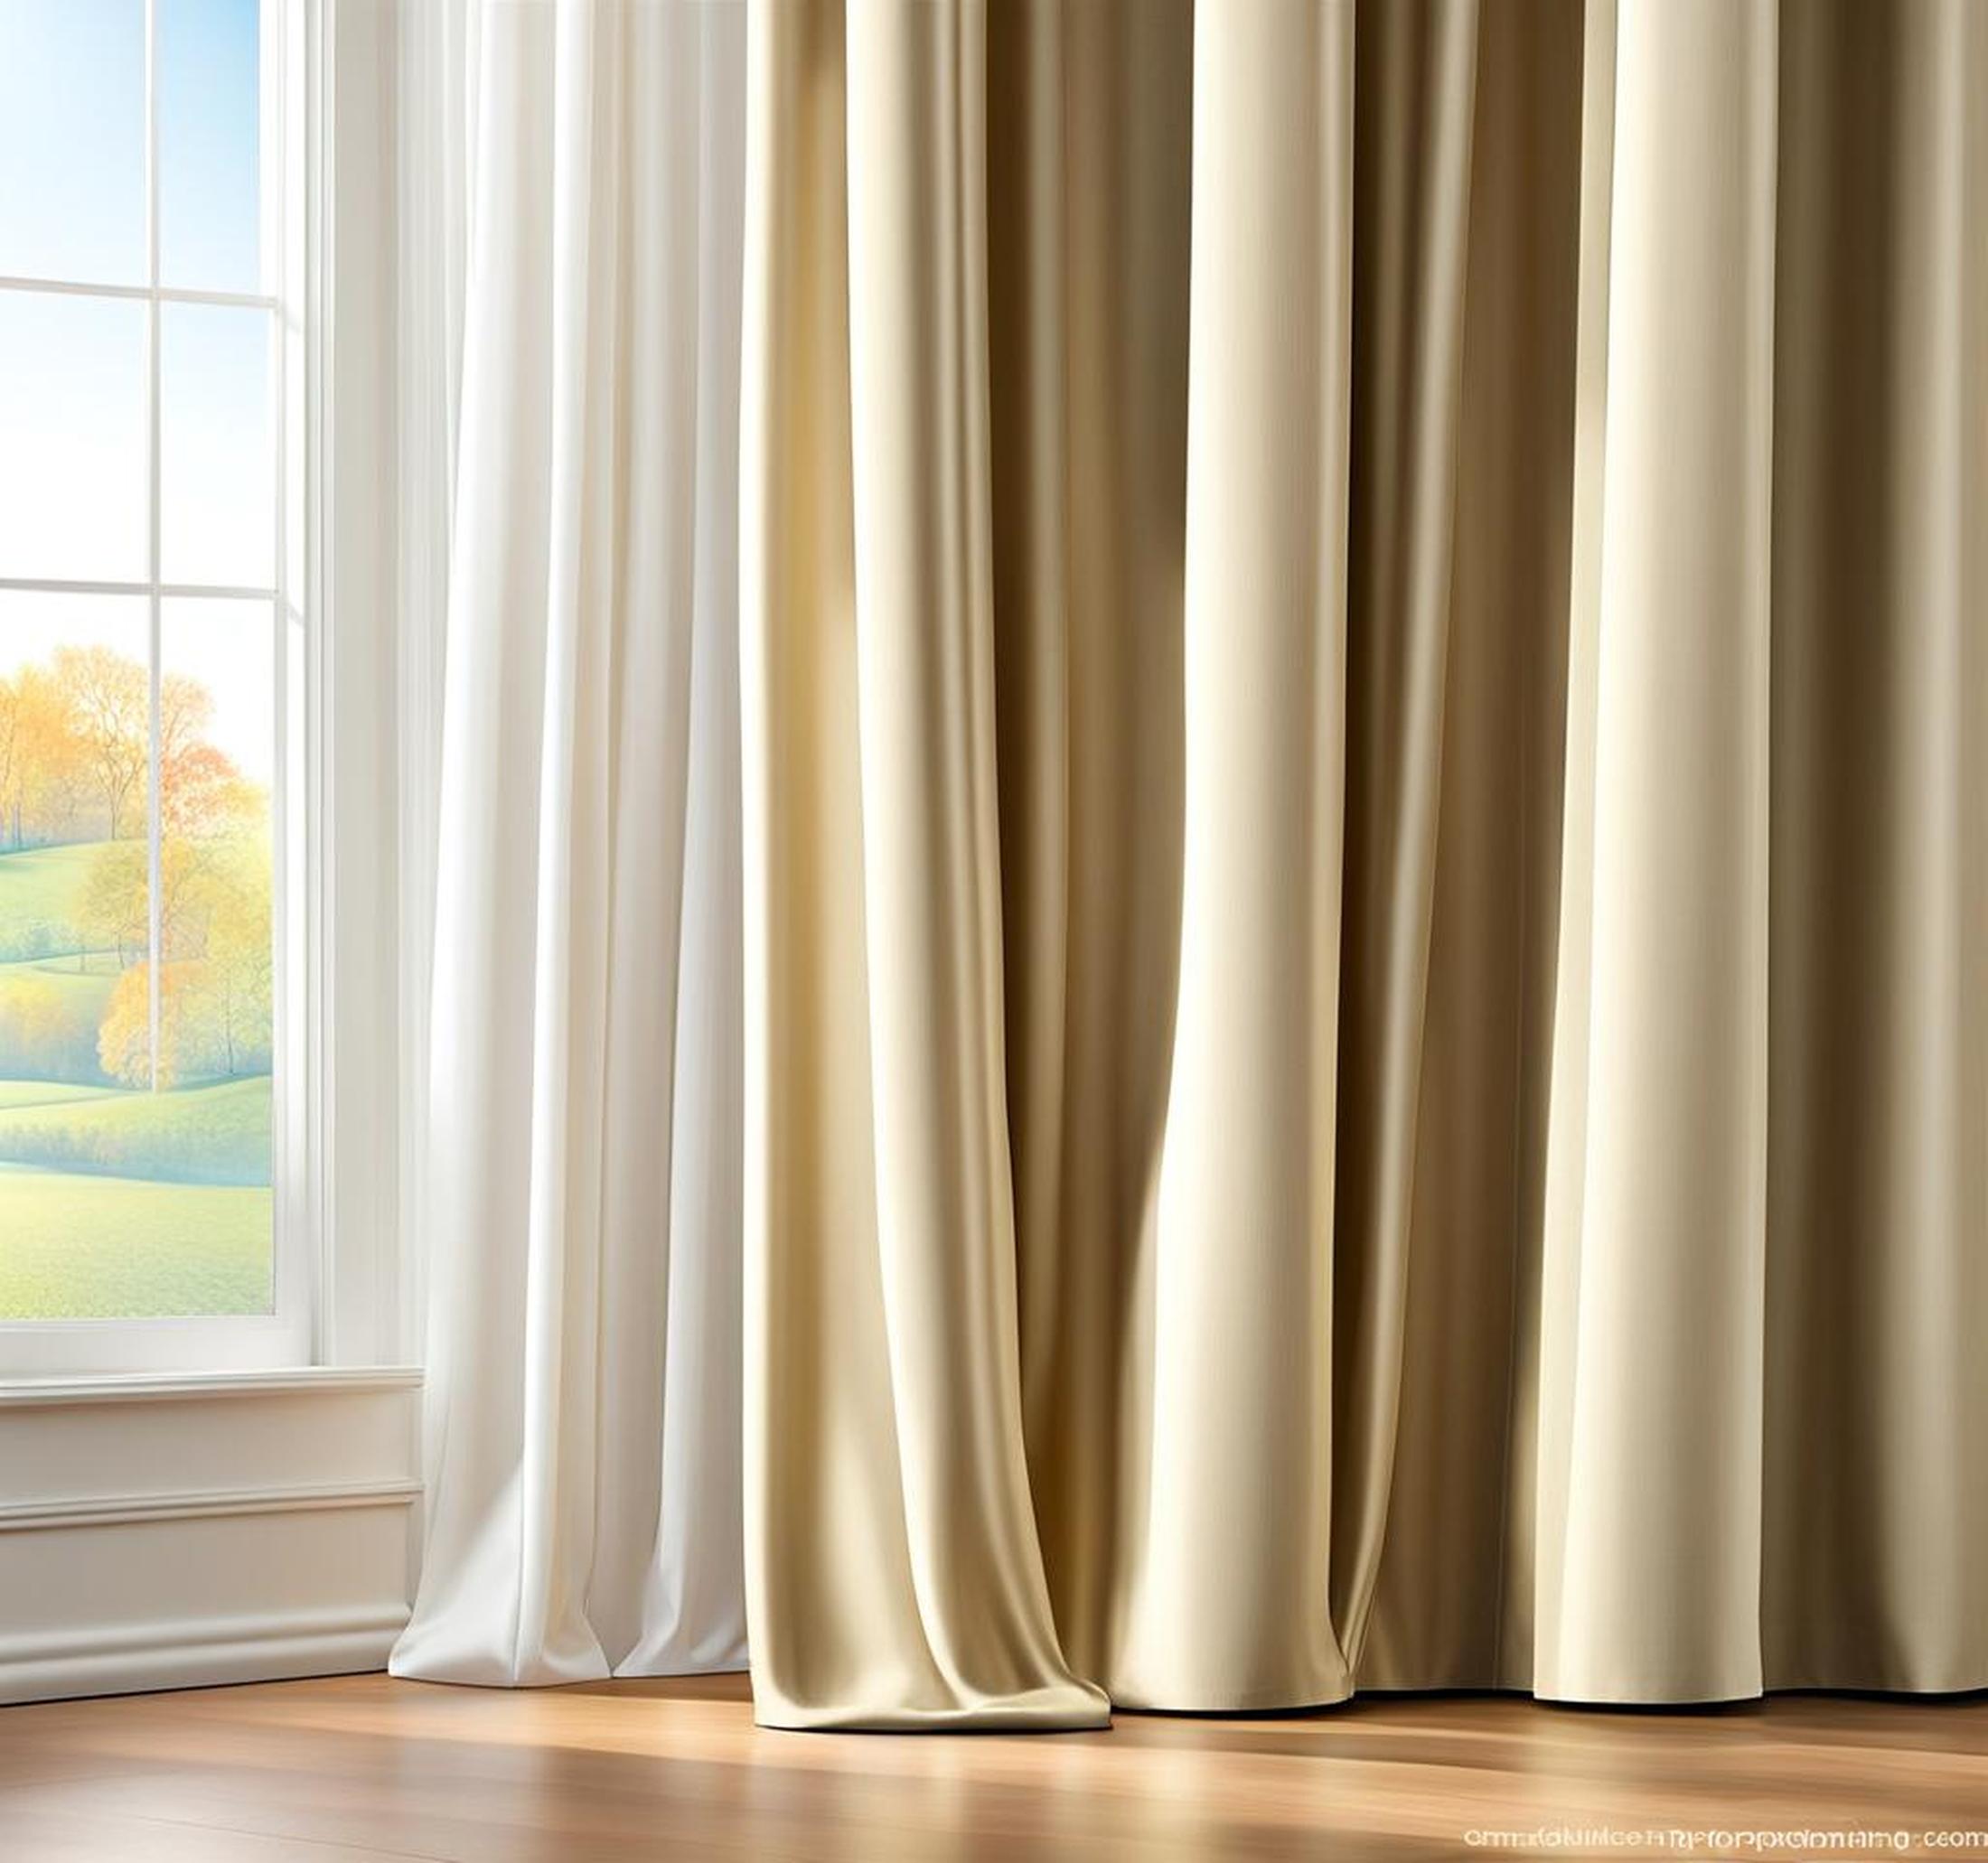 Get the Most Out of Your Window Frames with Inside Mount Curtain Rods